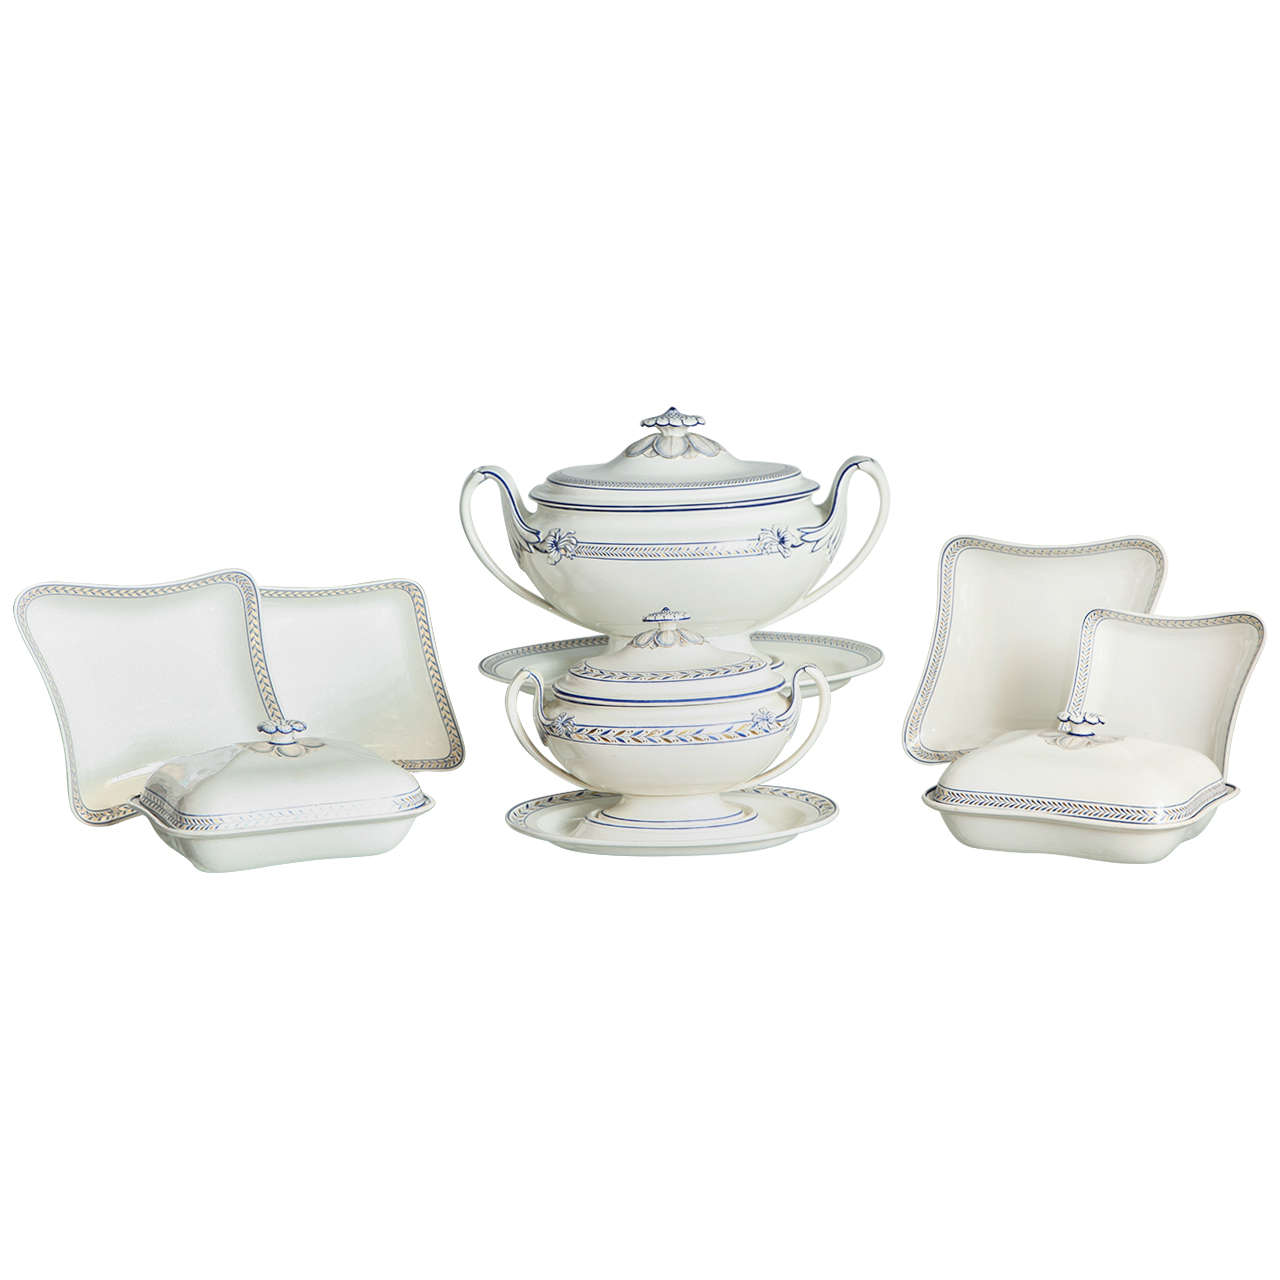 Set of Wedgewood China For Sale